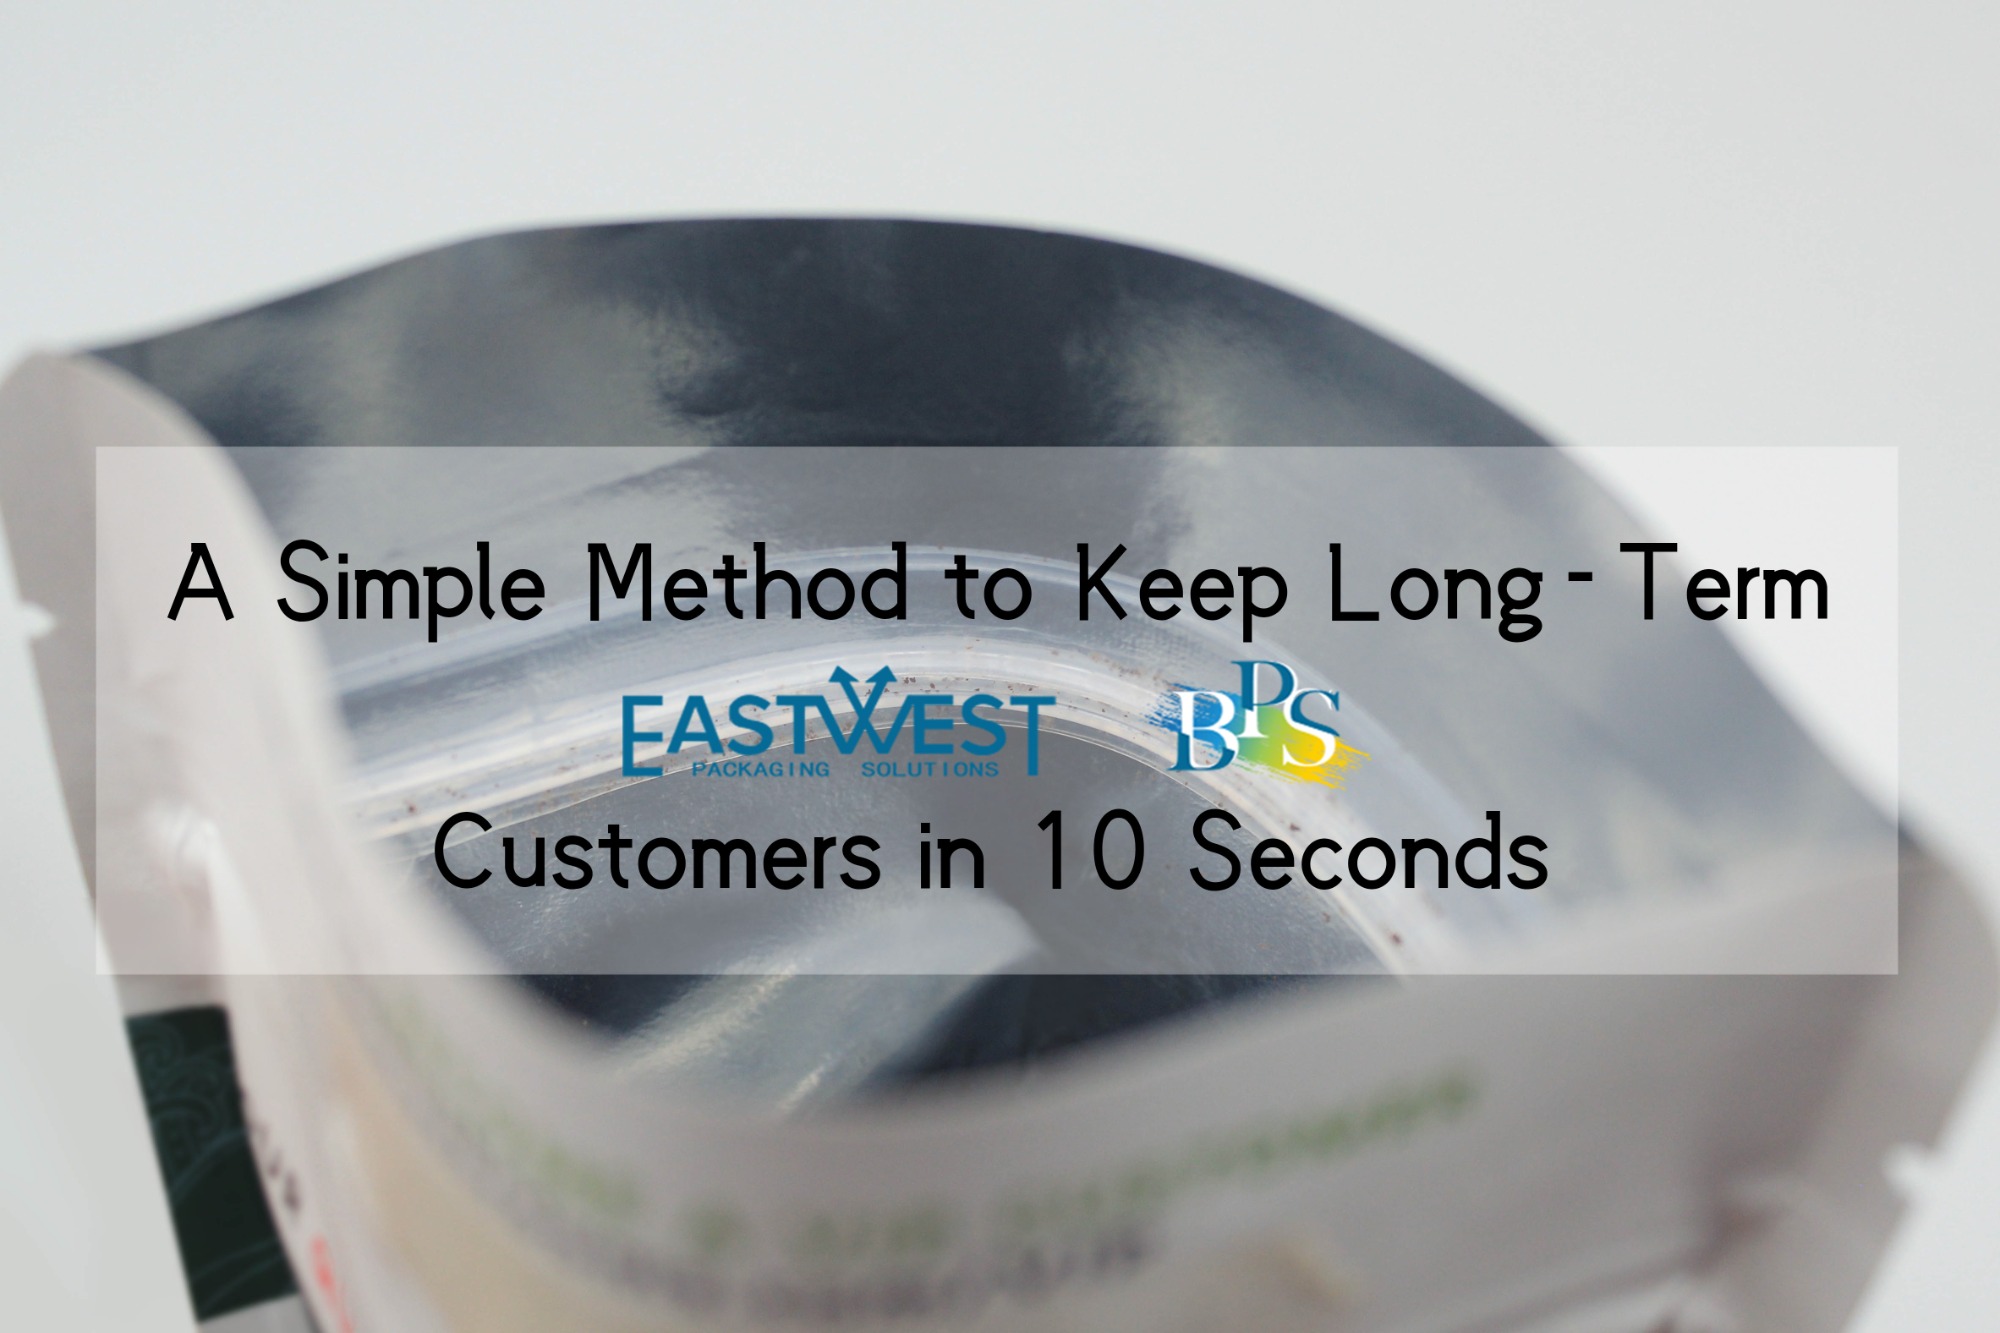 A Simple Method to Keep Long-Term Customers in 10 Seconds